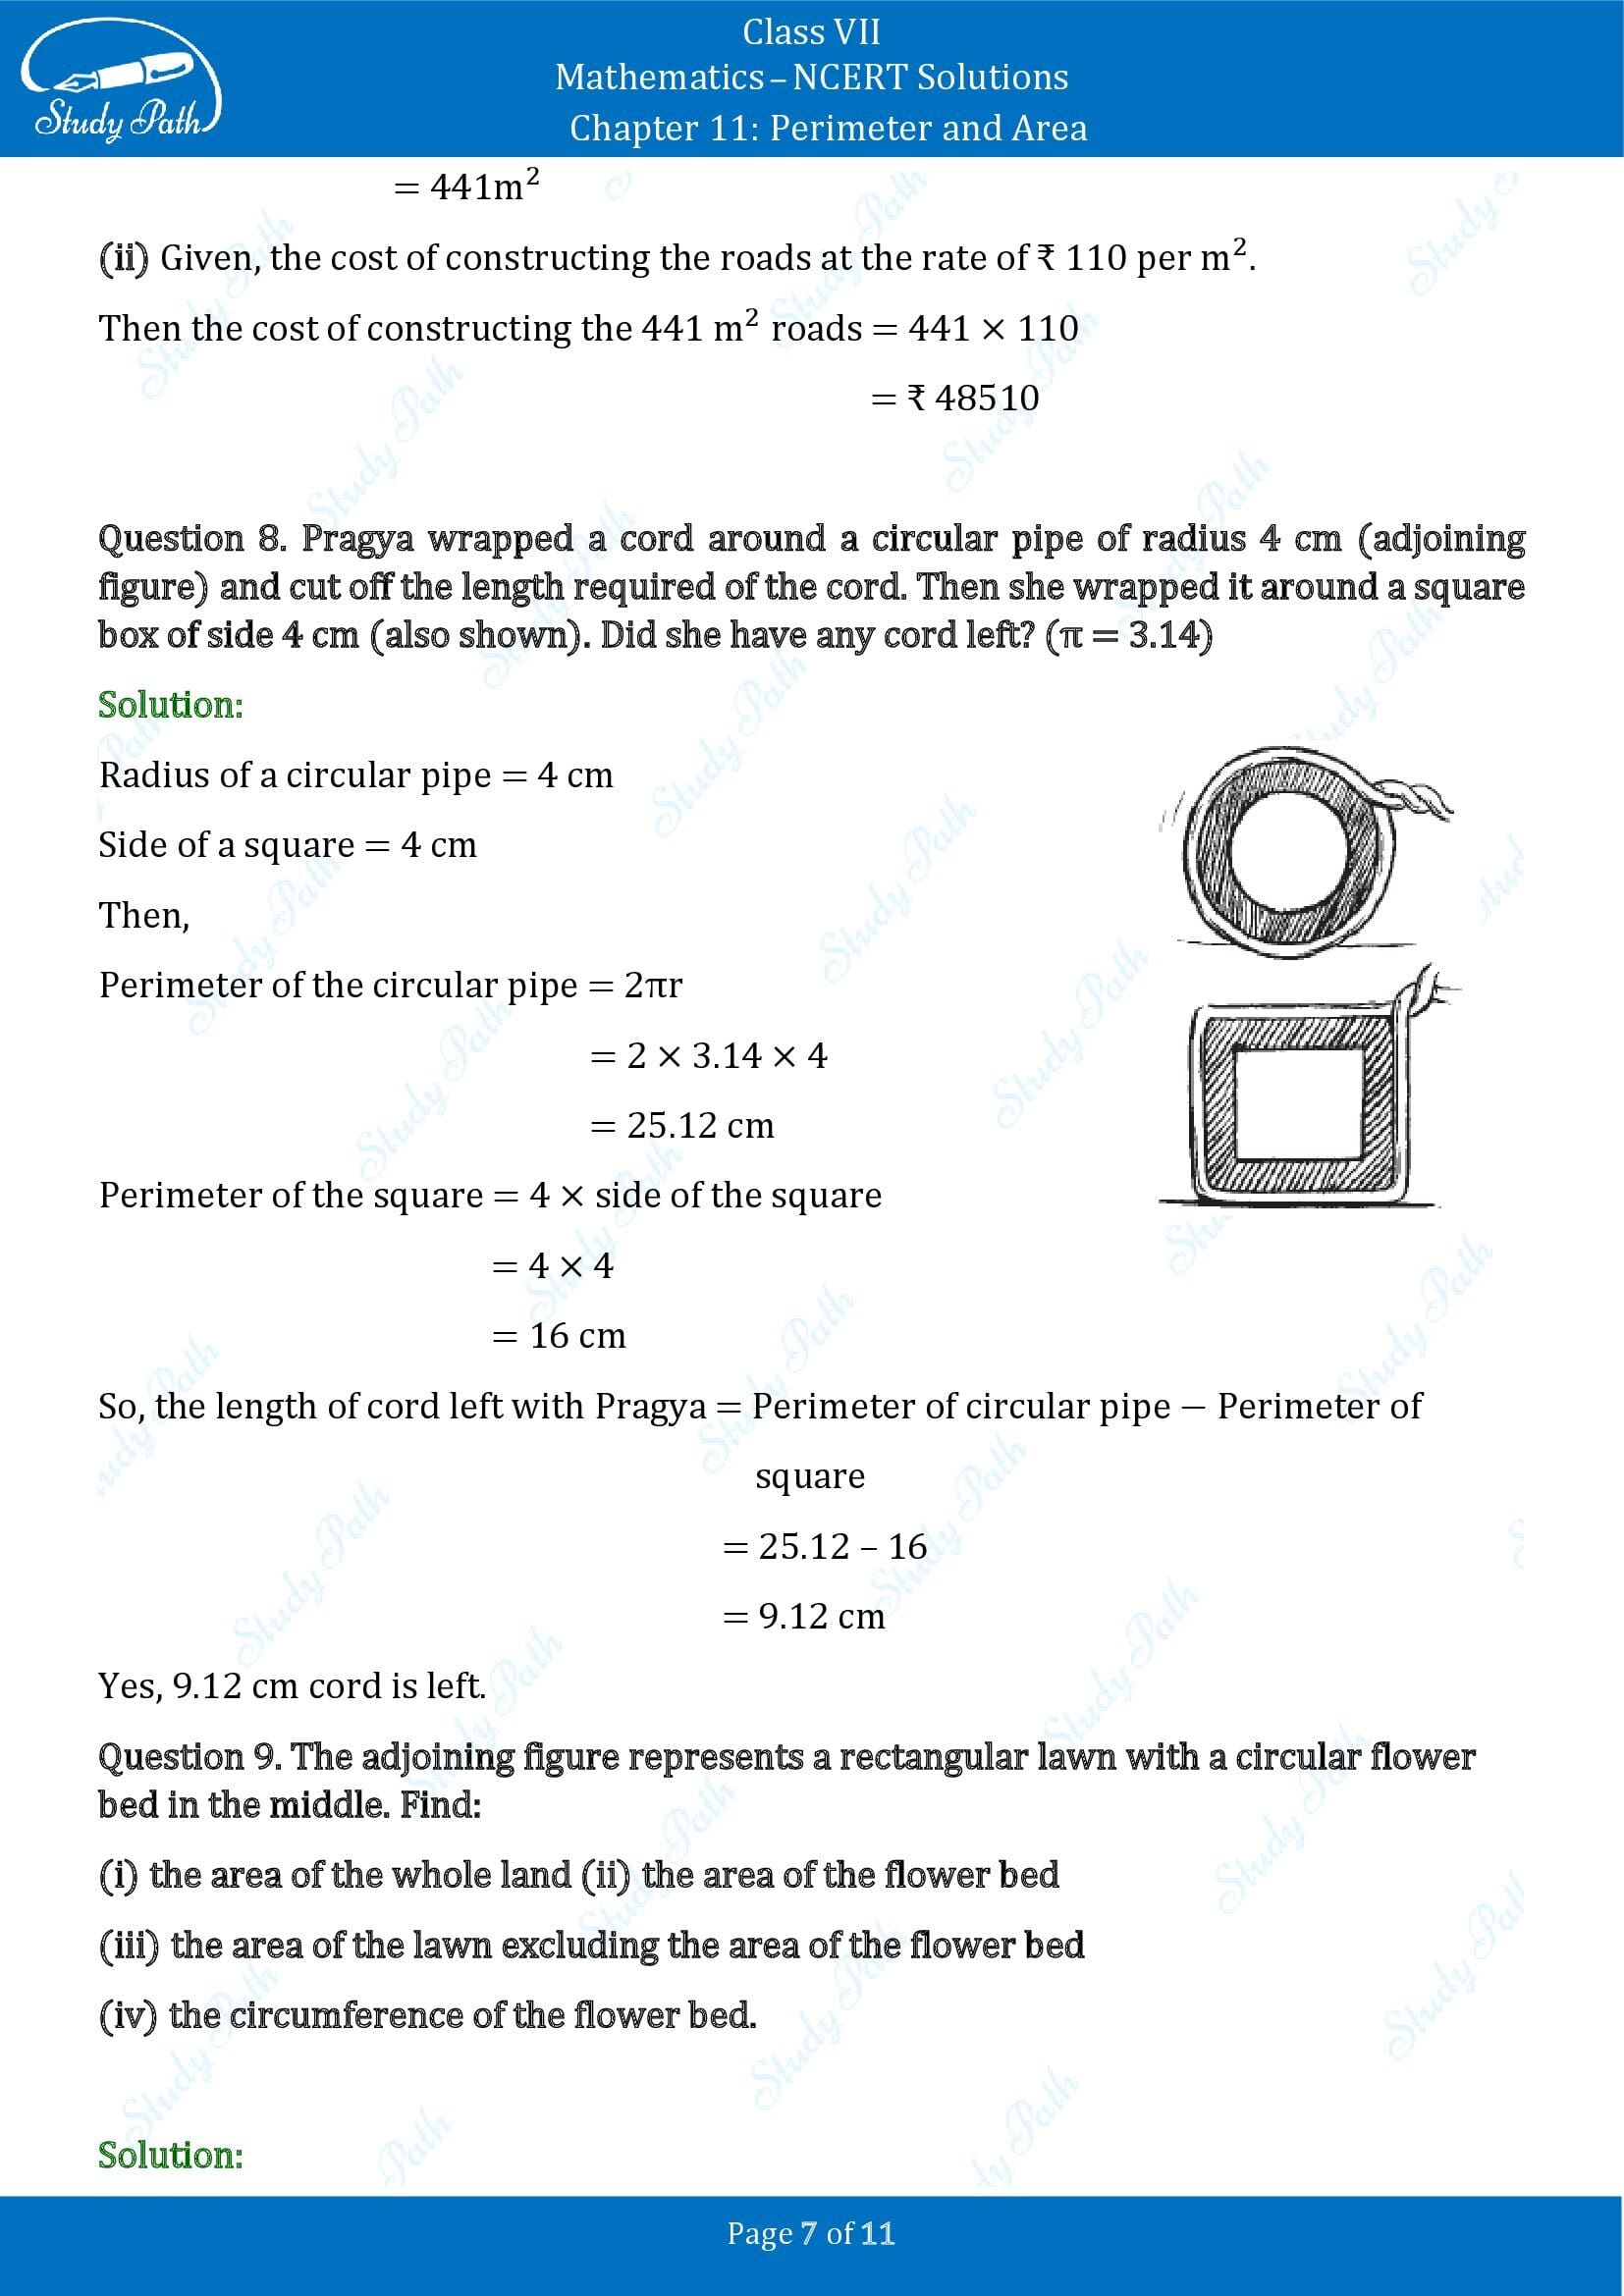 NCERT Solutions for Class 7 Maths Chapter 11 Perimeter and Area Exercise 11.4 00007